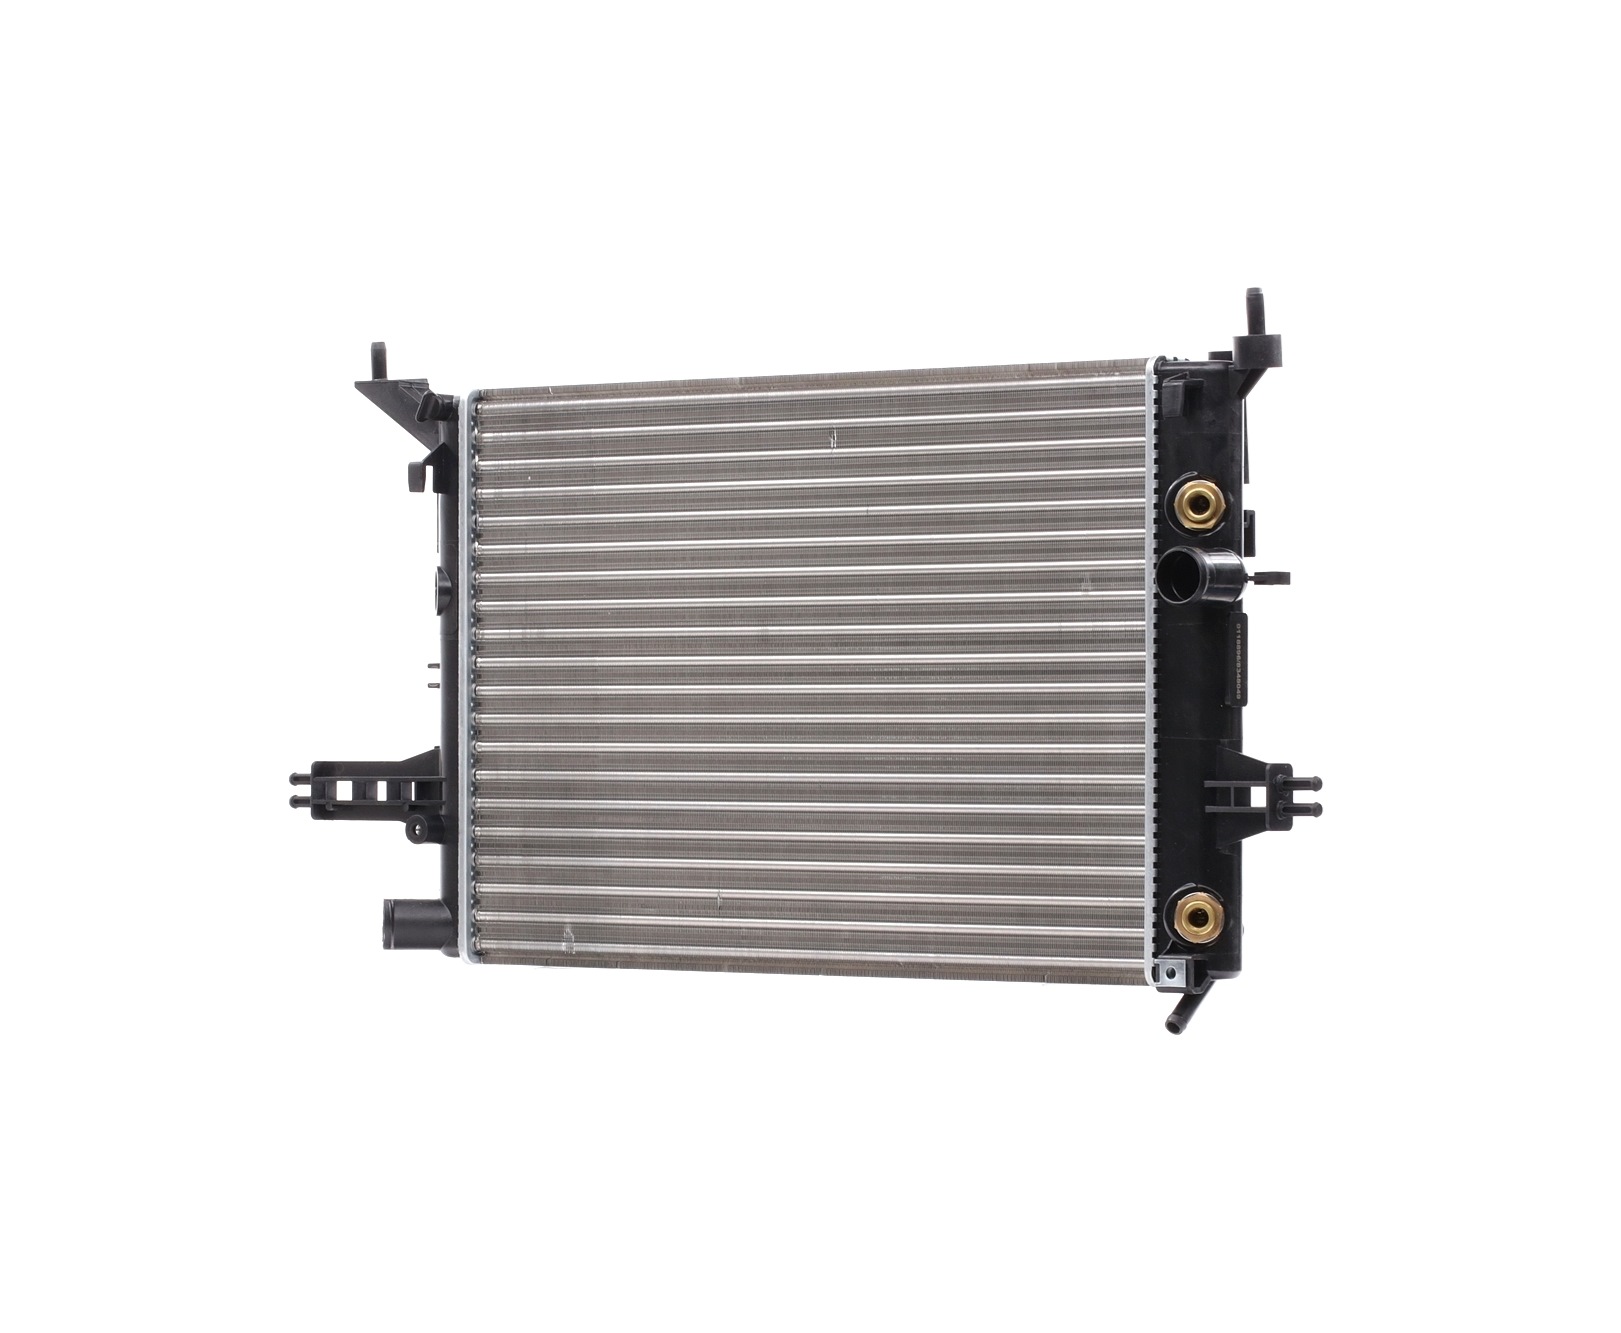 STARK SKRD-0120616 Engine radiator Aluminium, Plastic, for vehicles without air conditioning, Fully Automatic